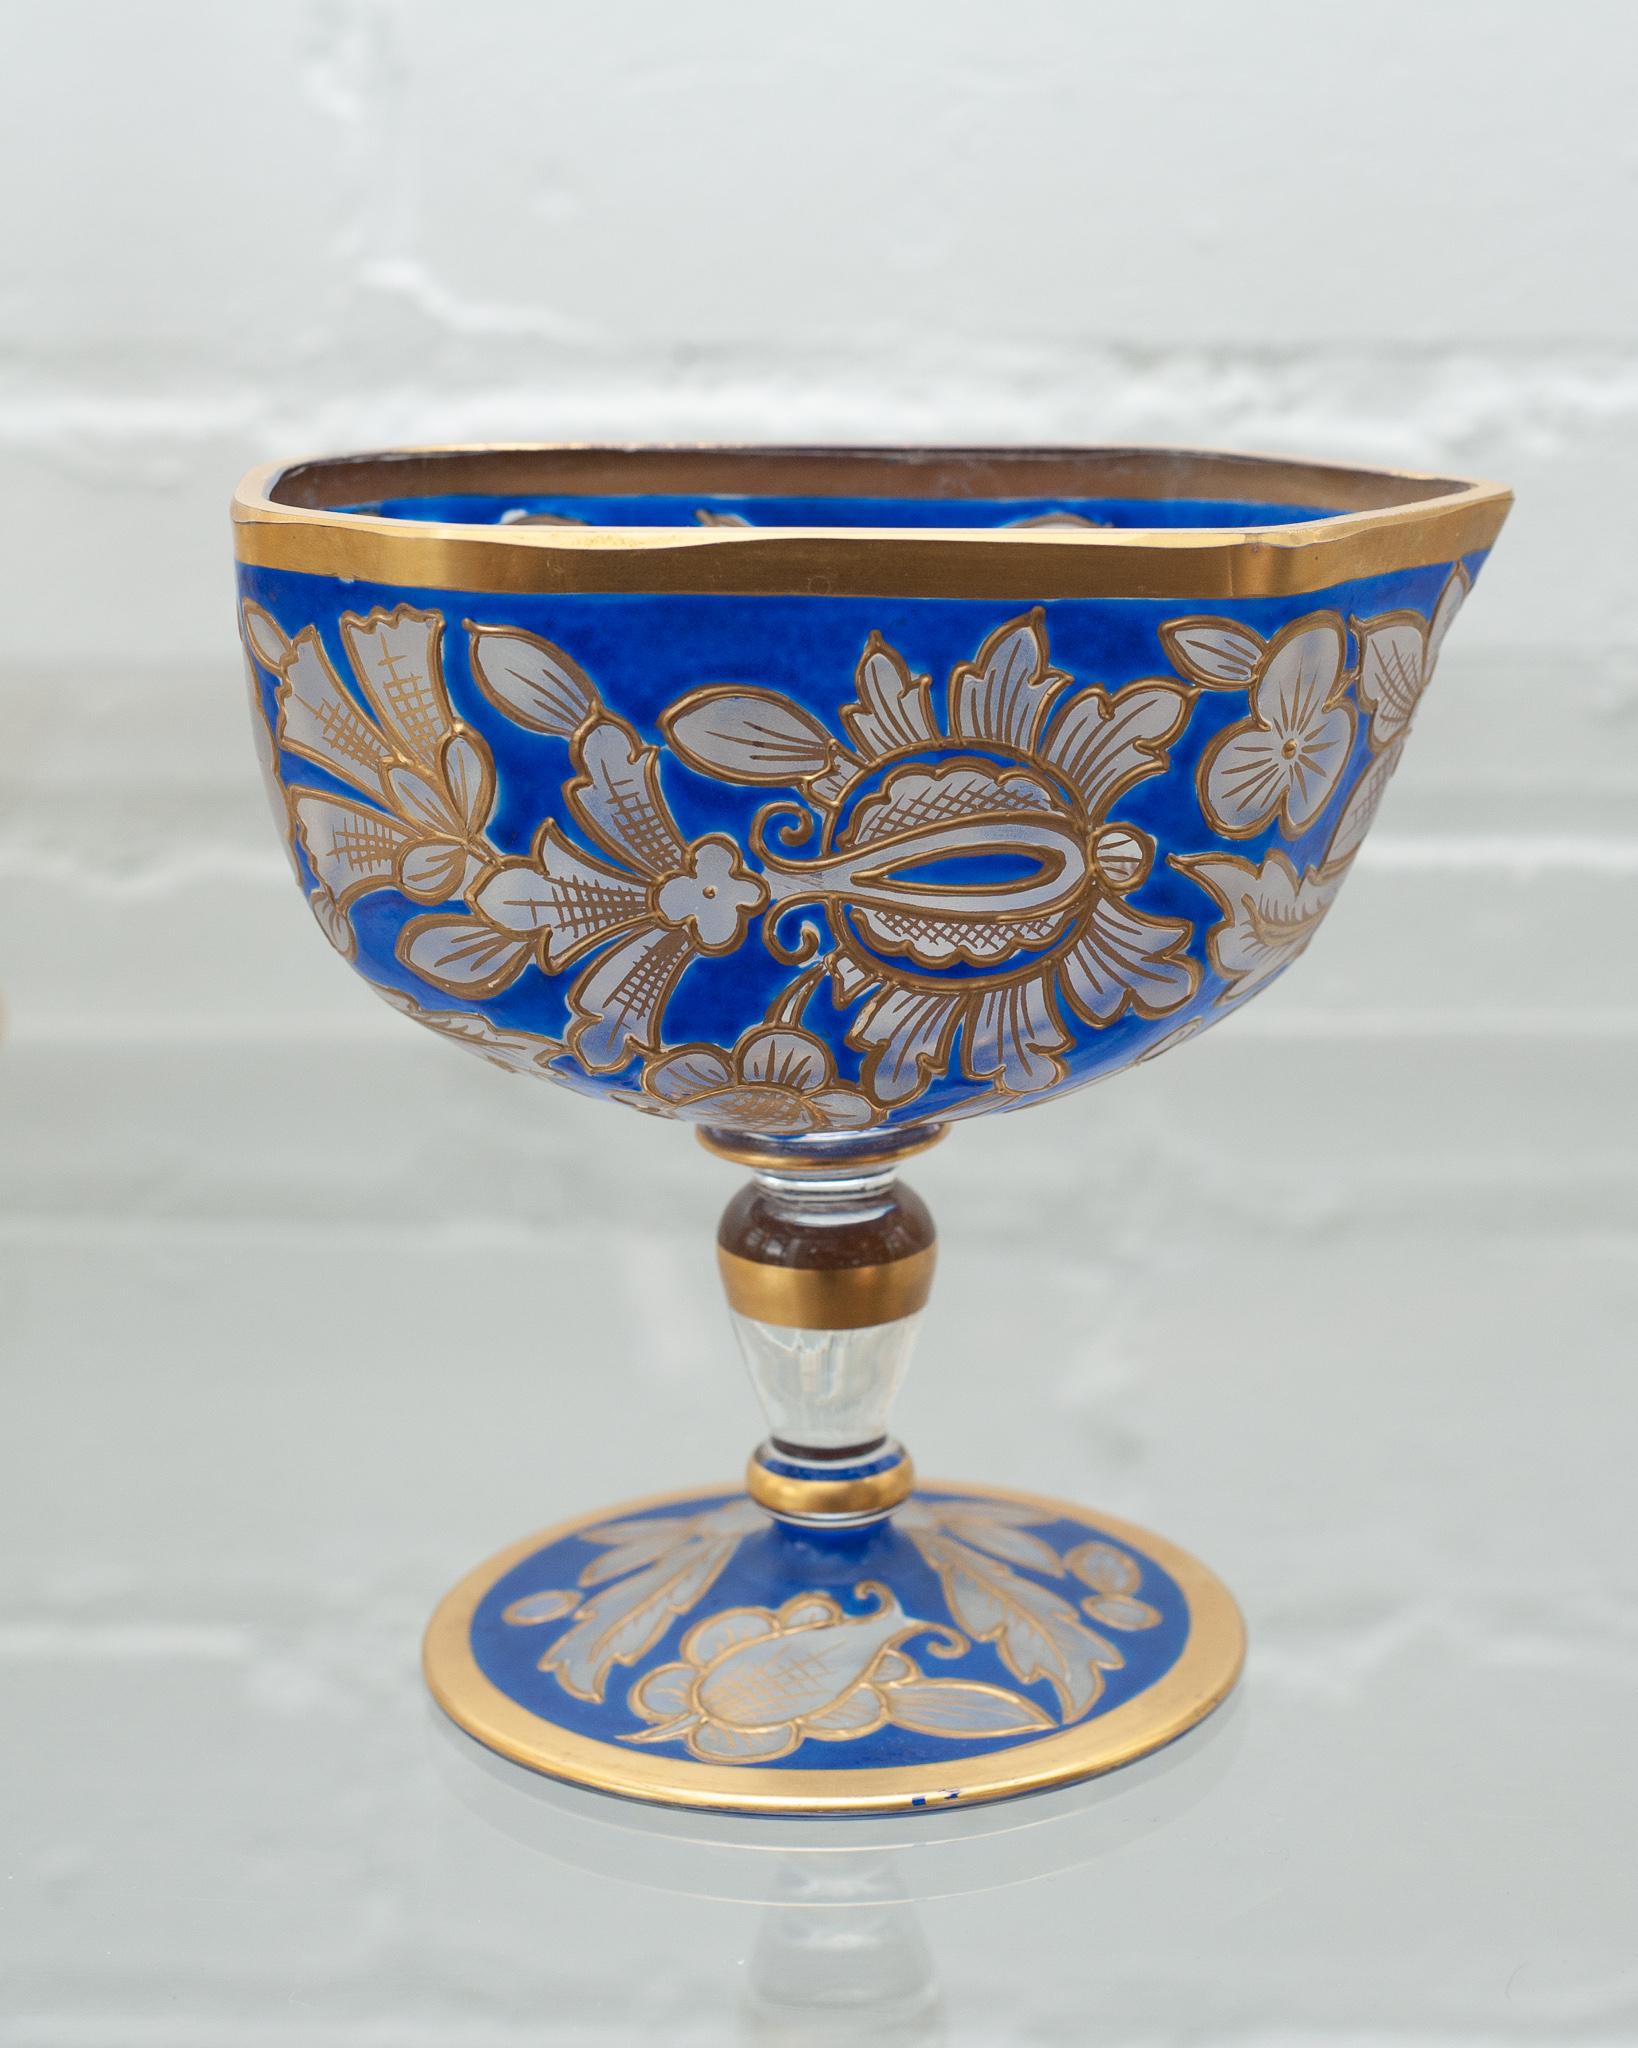 A beautiful antique Bohemian blue and gold gilt sauce boat, circa 1920. A perfect addition to the table with its ornately decorated with floral motifs on a cobalt blue background.